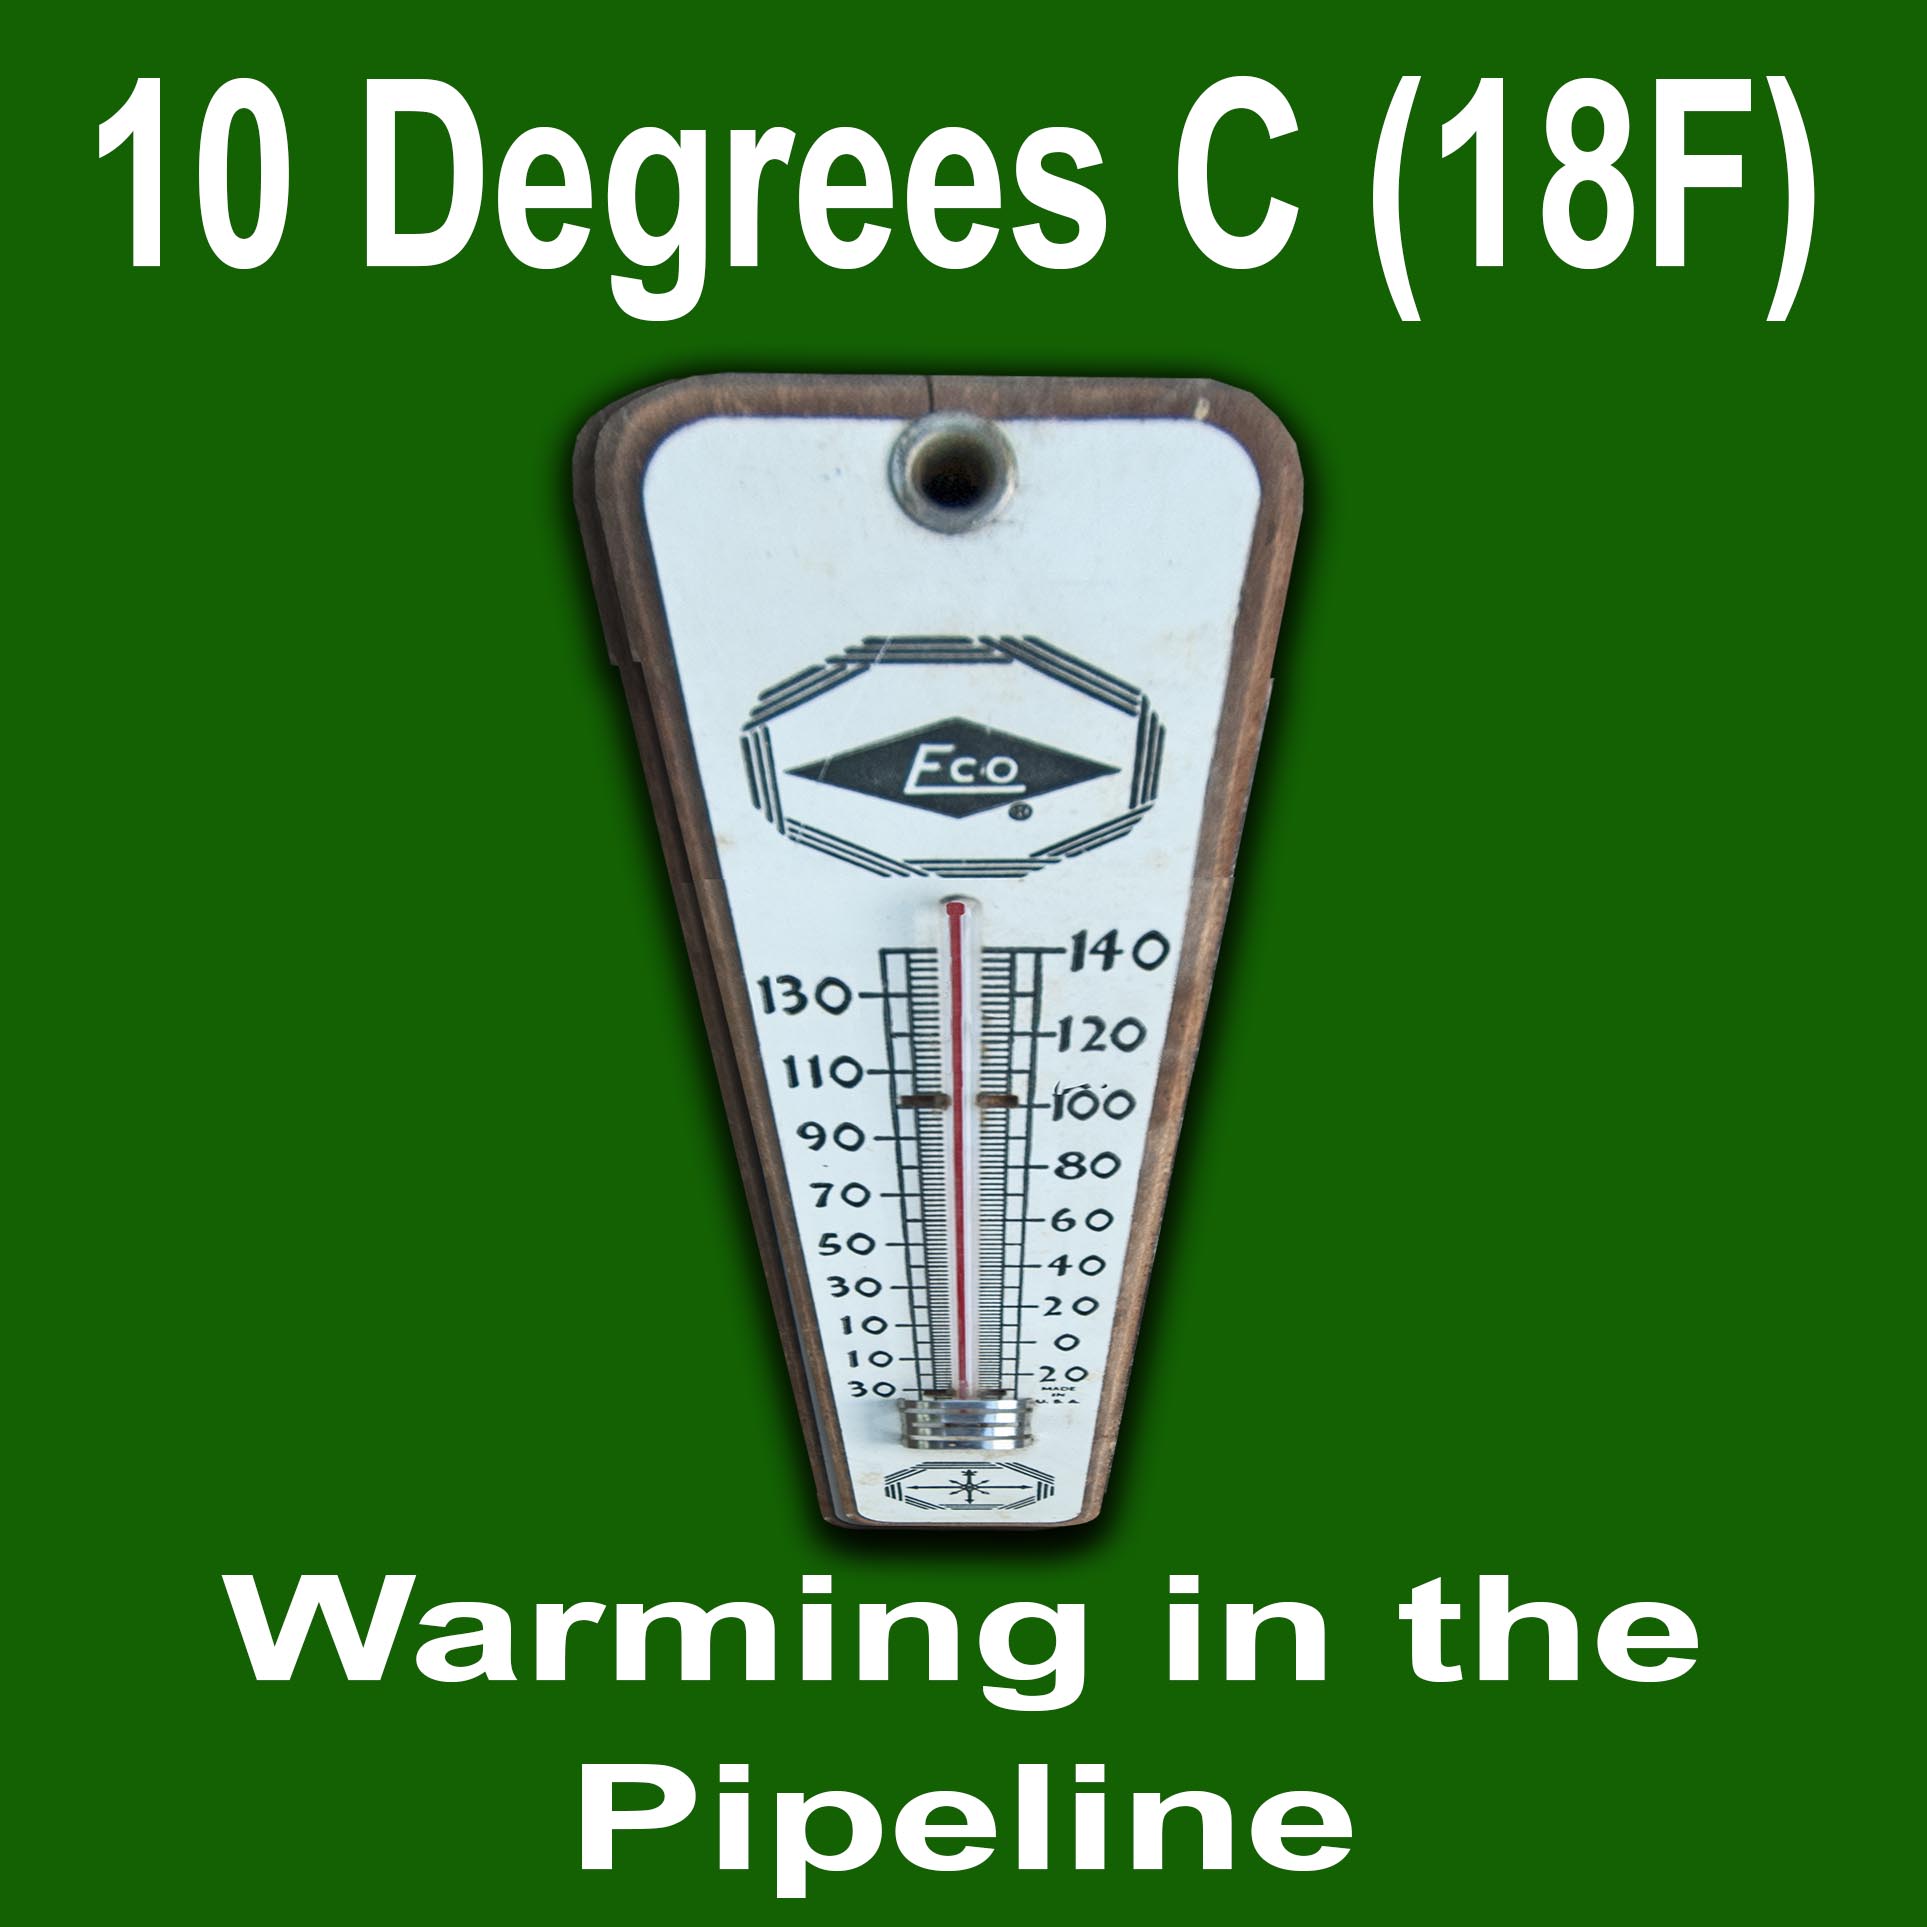 Hansen’s Latest: 10 Degrees C (18 F) Warming in the Pipeline